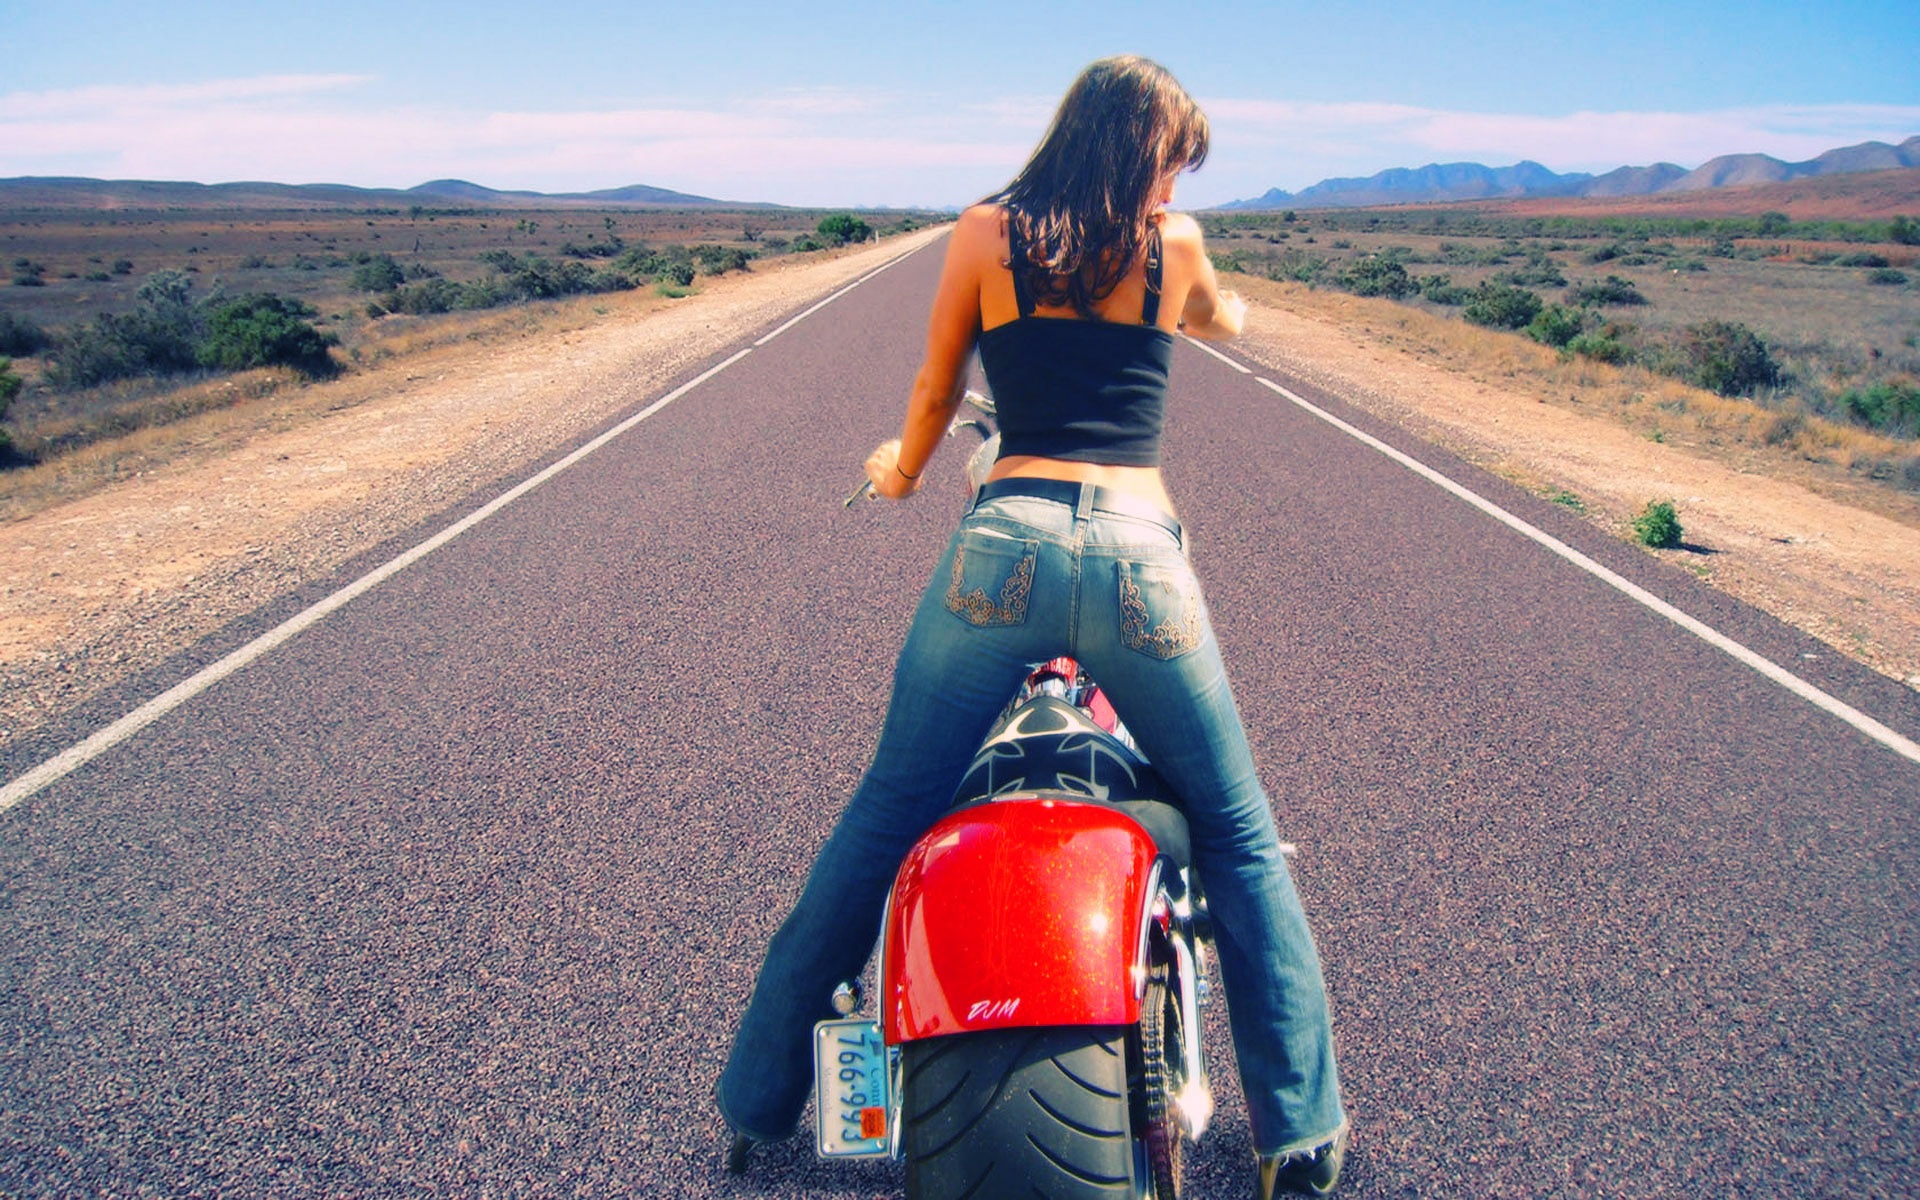 Girls on motorcycles Pics mainly   but comments now allowed   Page 1920x1200